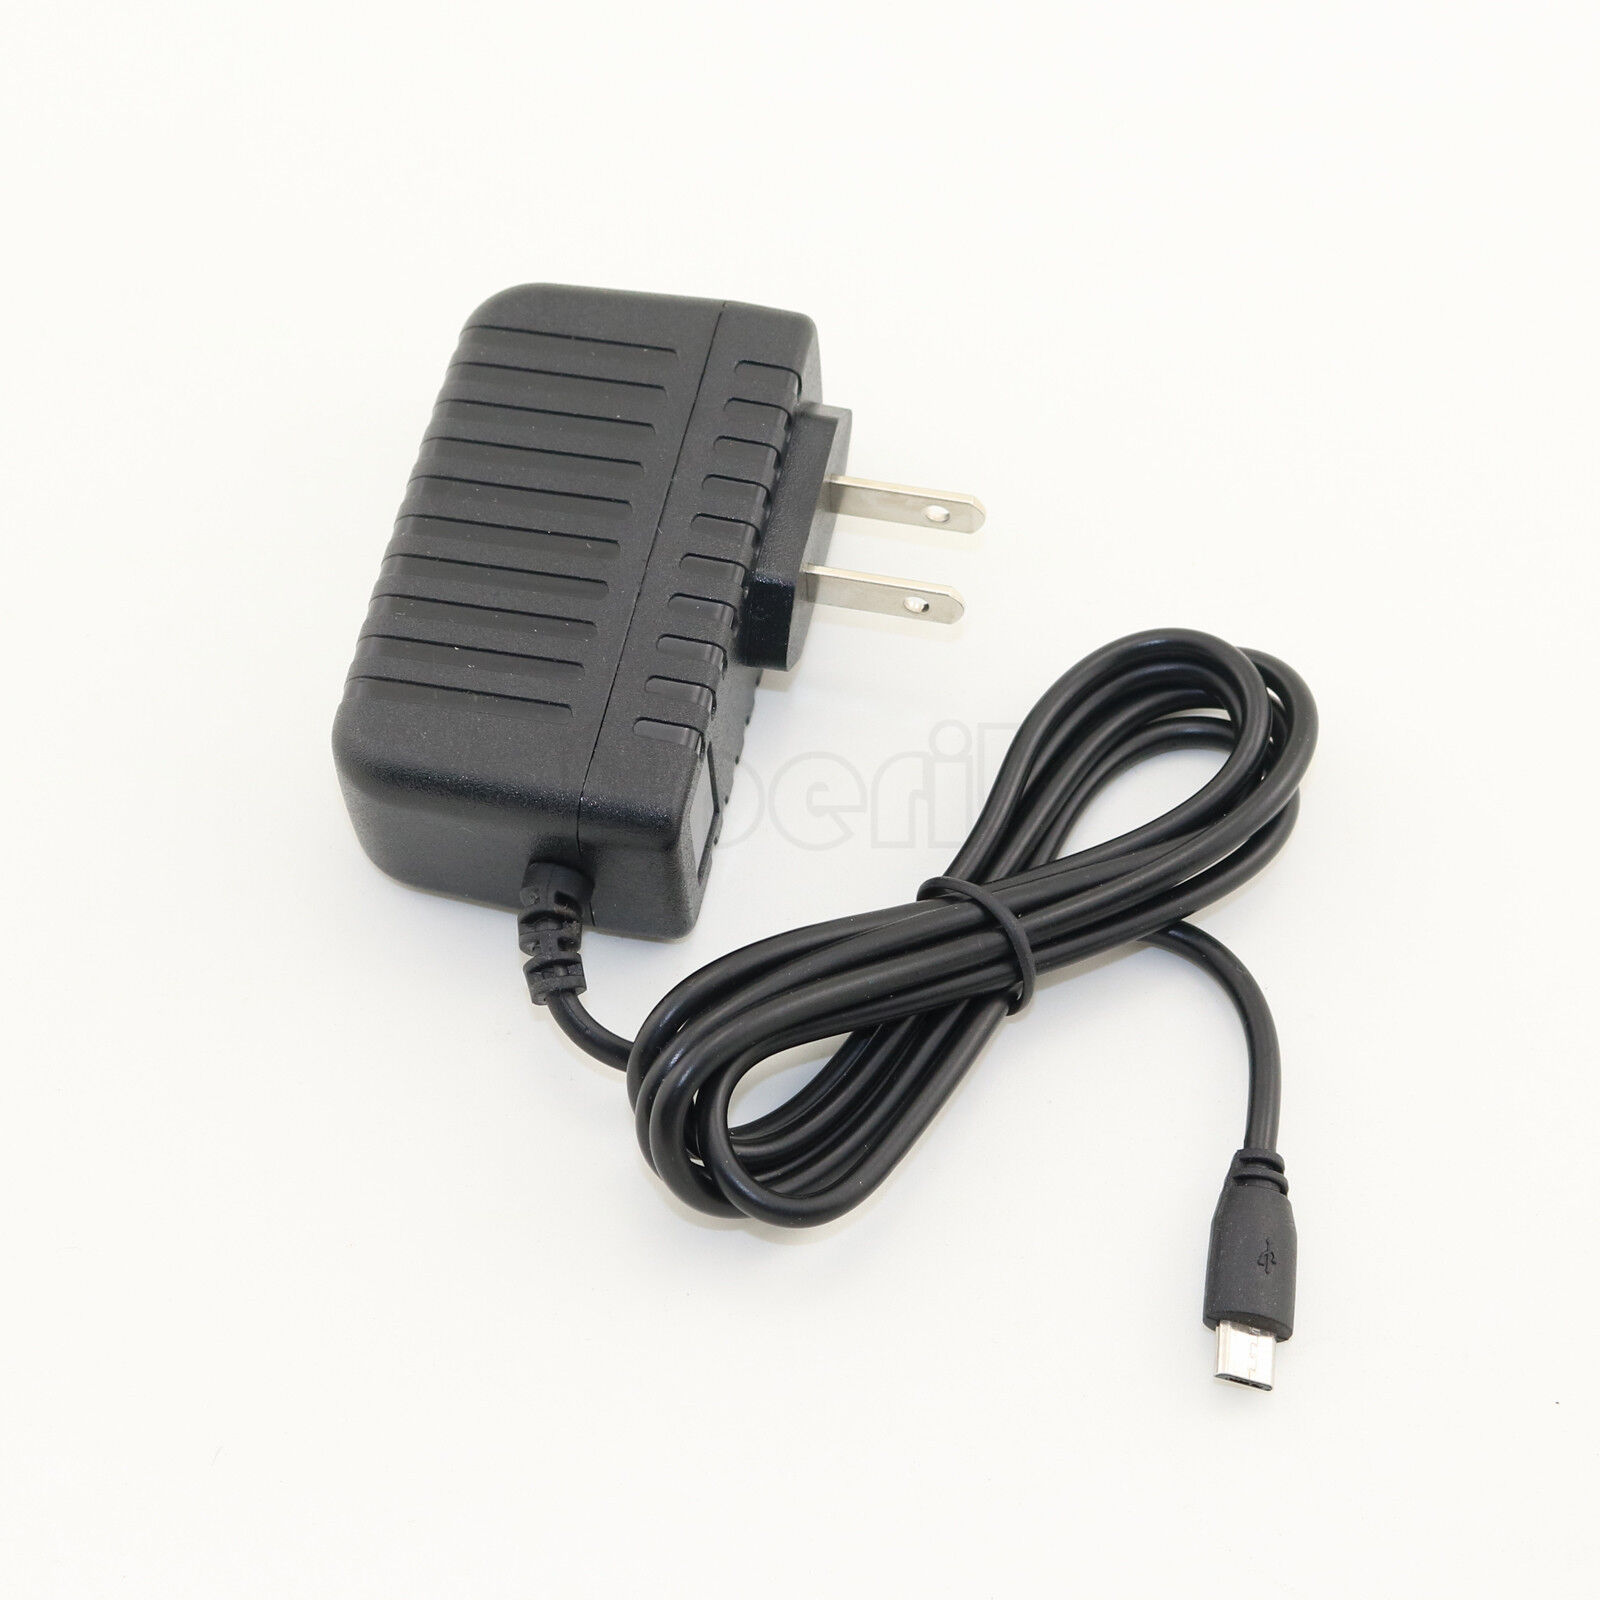 Replace 5V 2A AC Power Adapter Micro USB Wall Charger For Anker Astro E3 E4 E5 Type: Wall Charger Compatible Brand: F